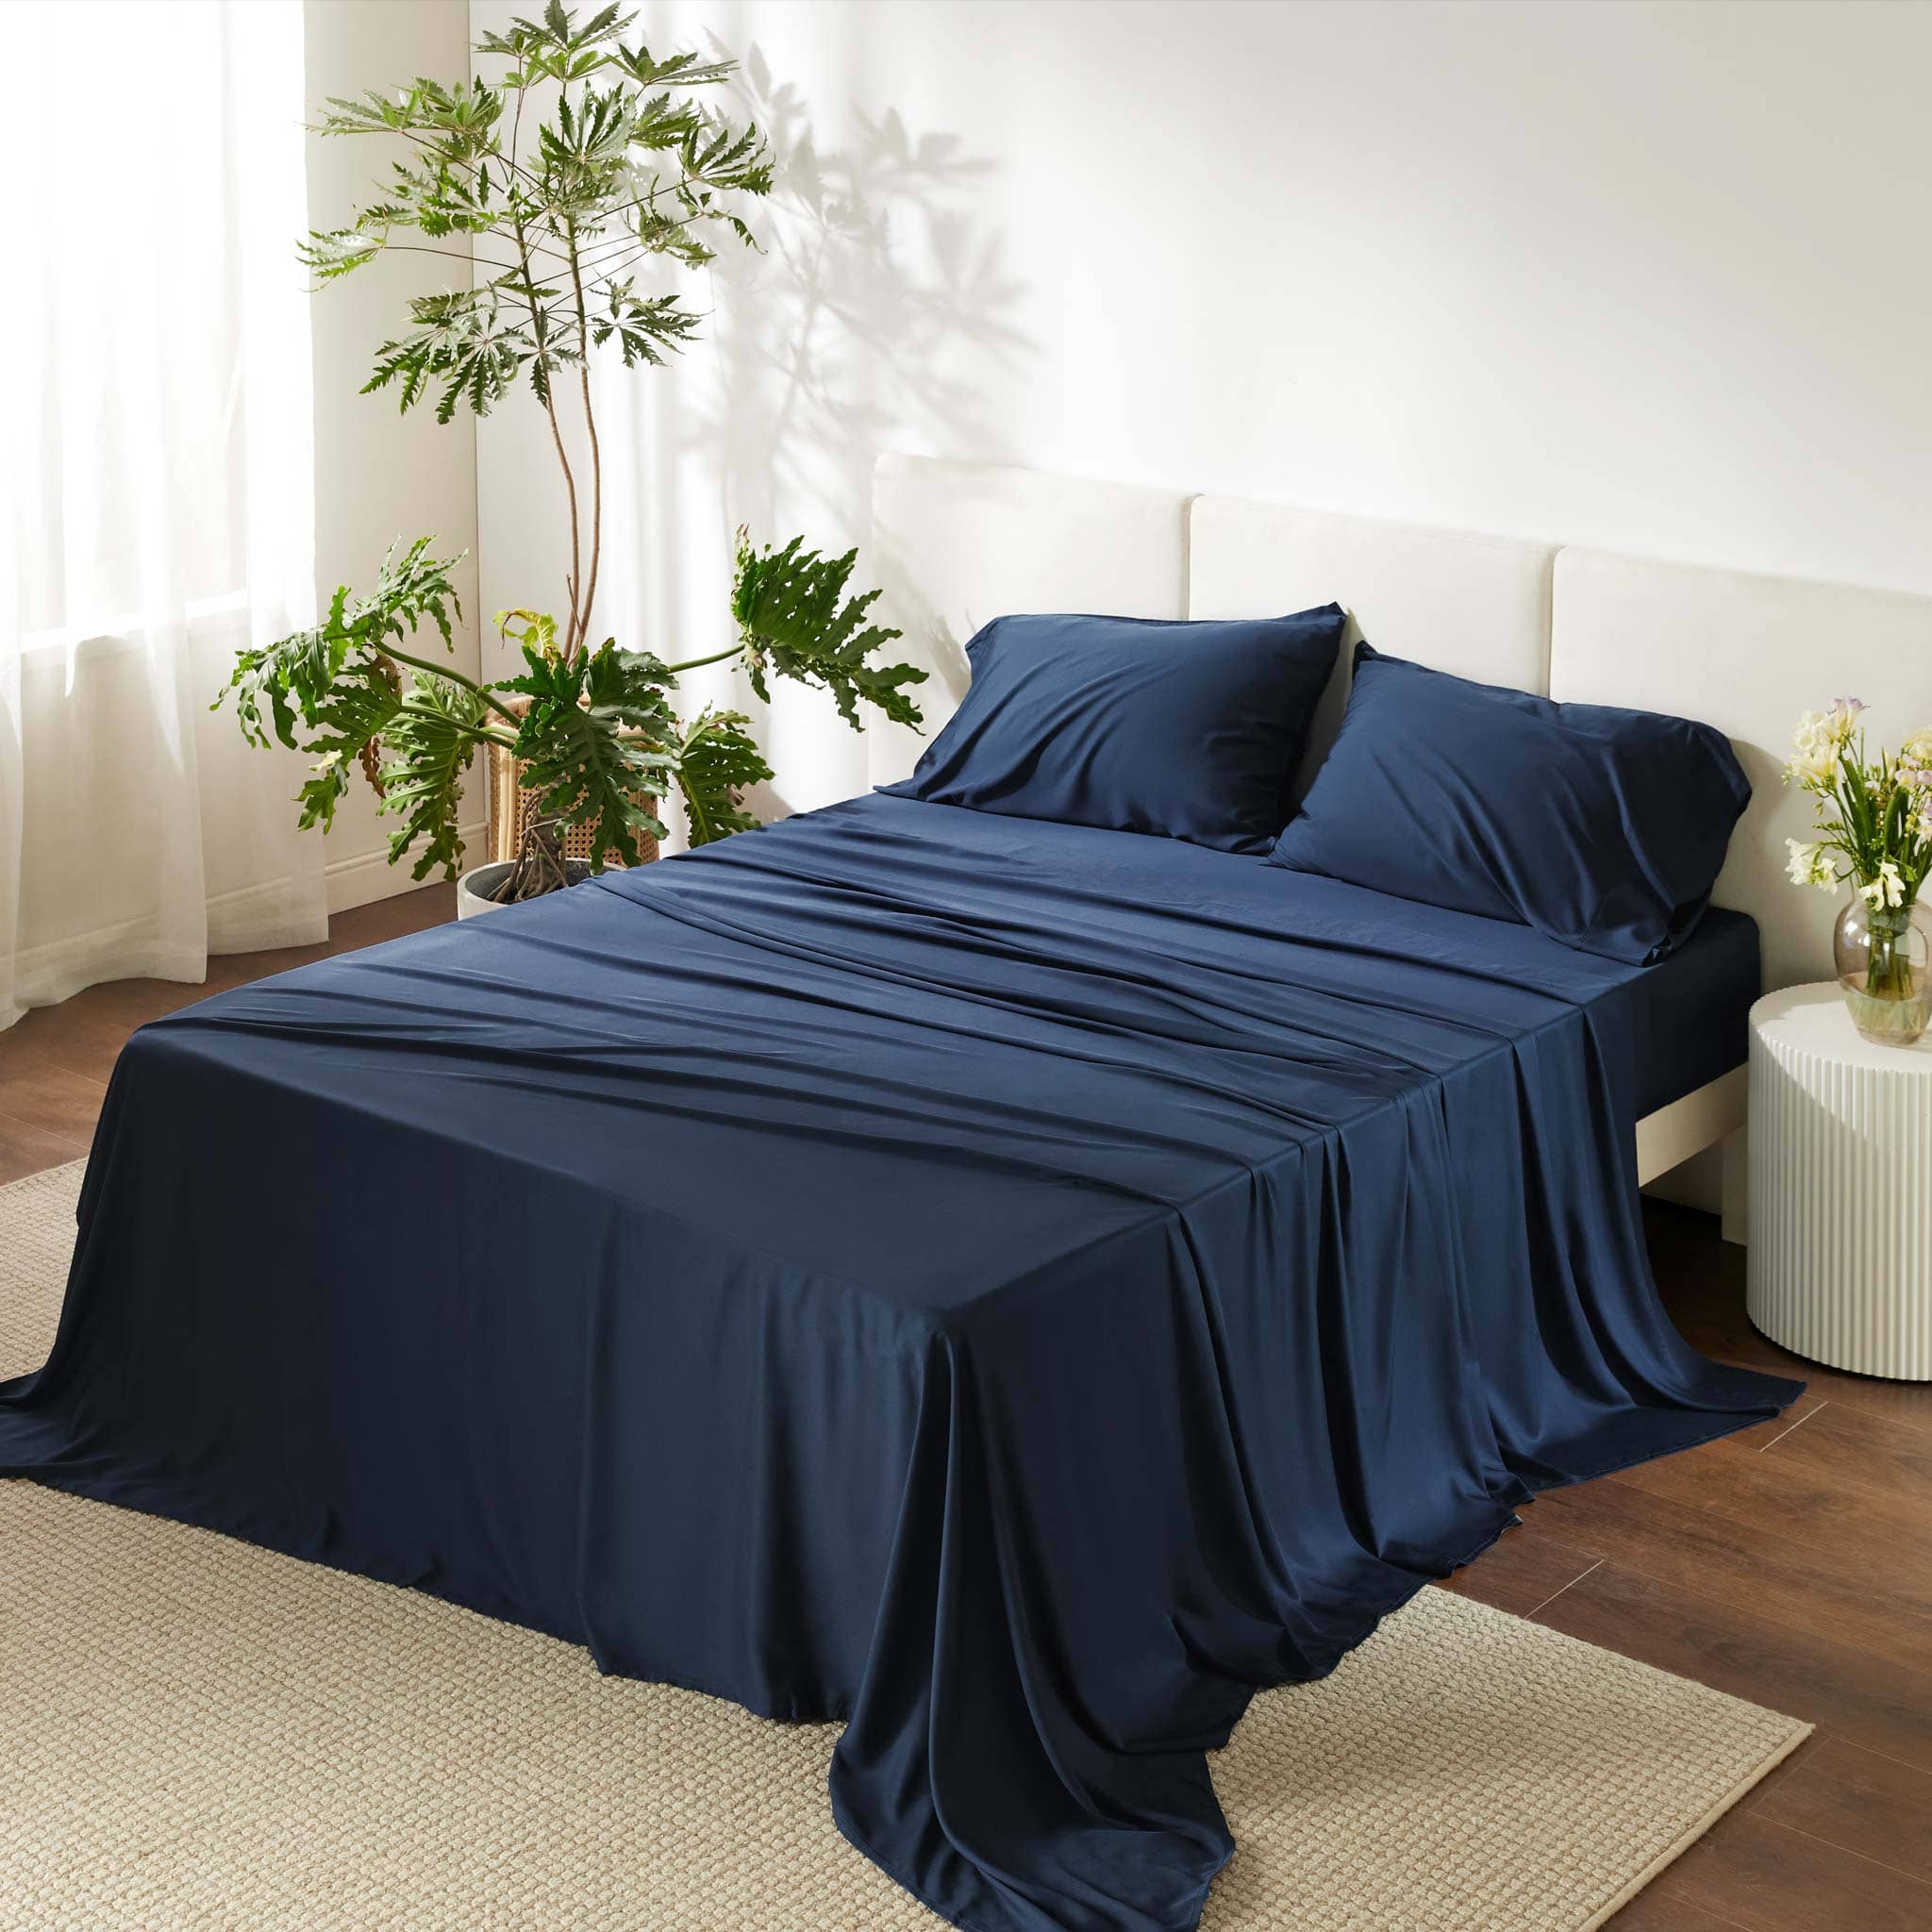 100% Bamboo Bed Sheets, Royal Blue, Queen Size